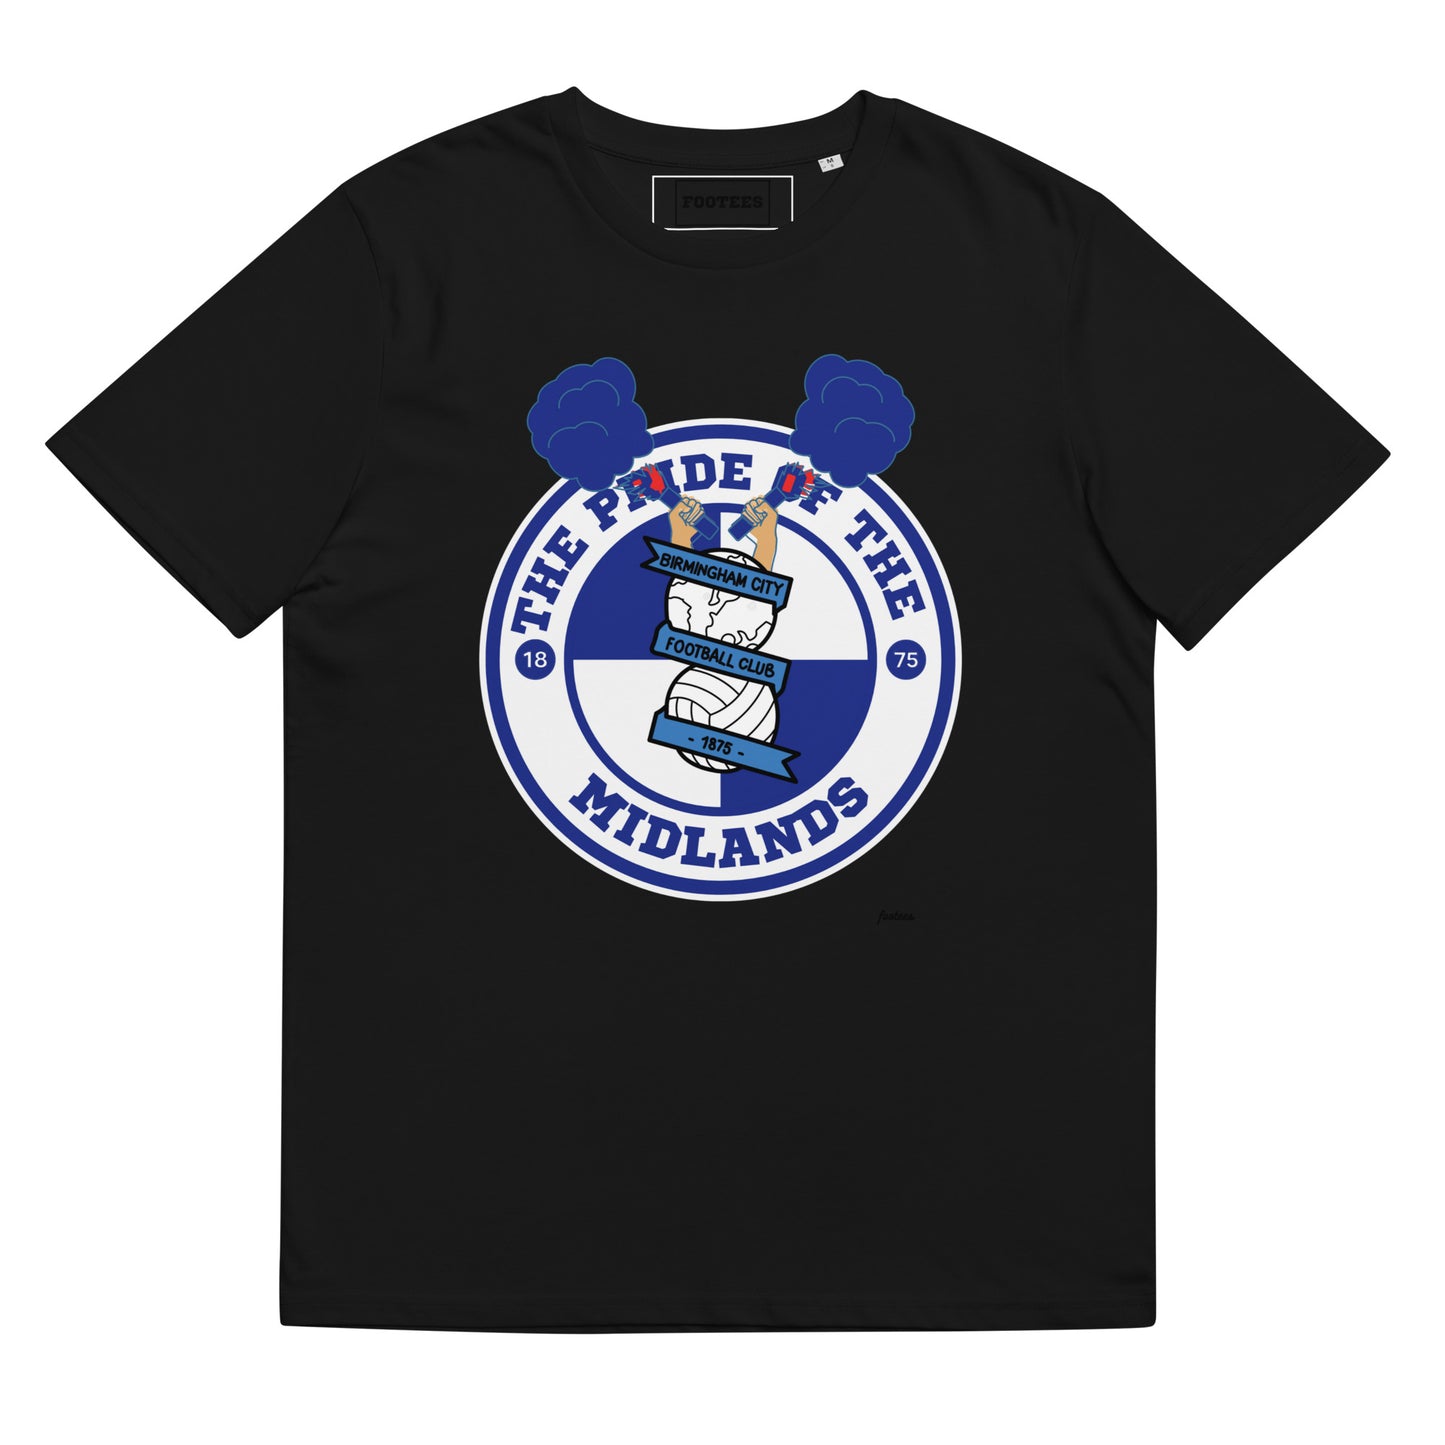 The Pride of the Midlands BCFC Tee